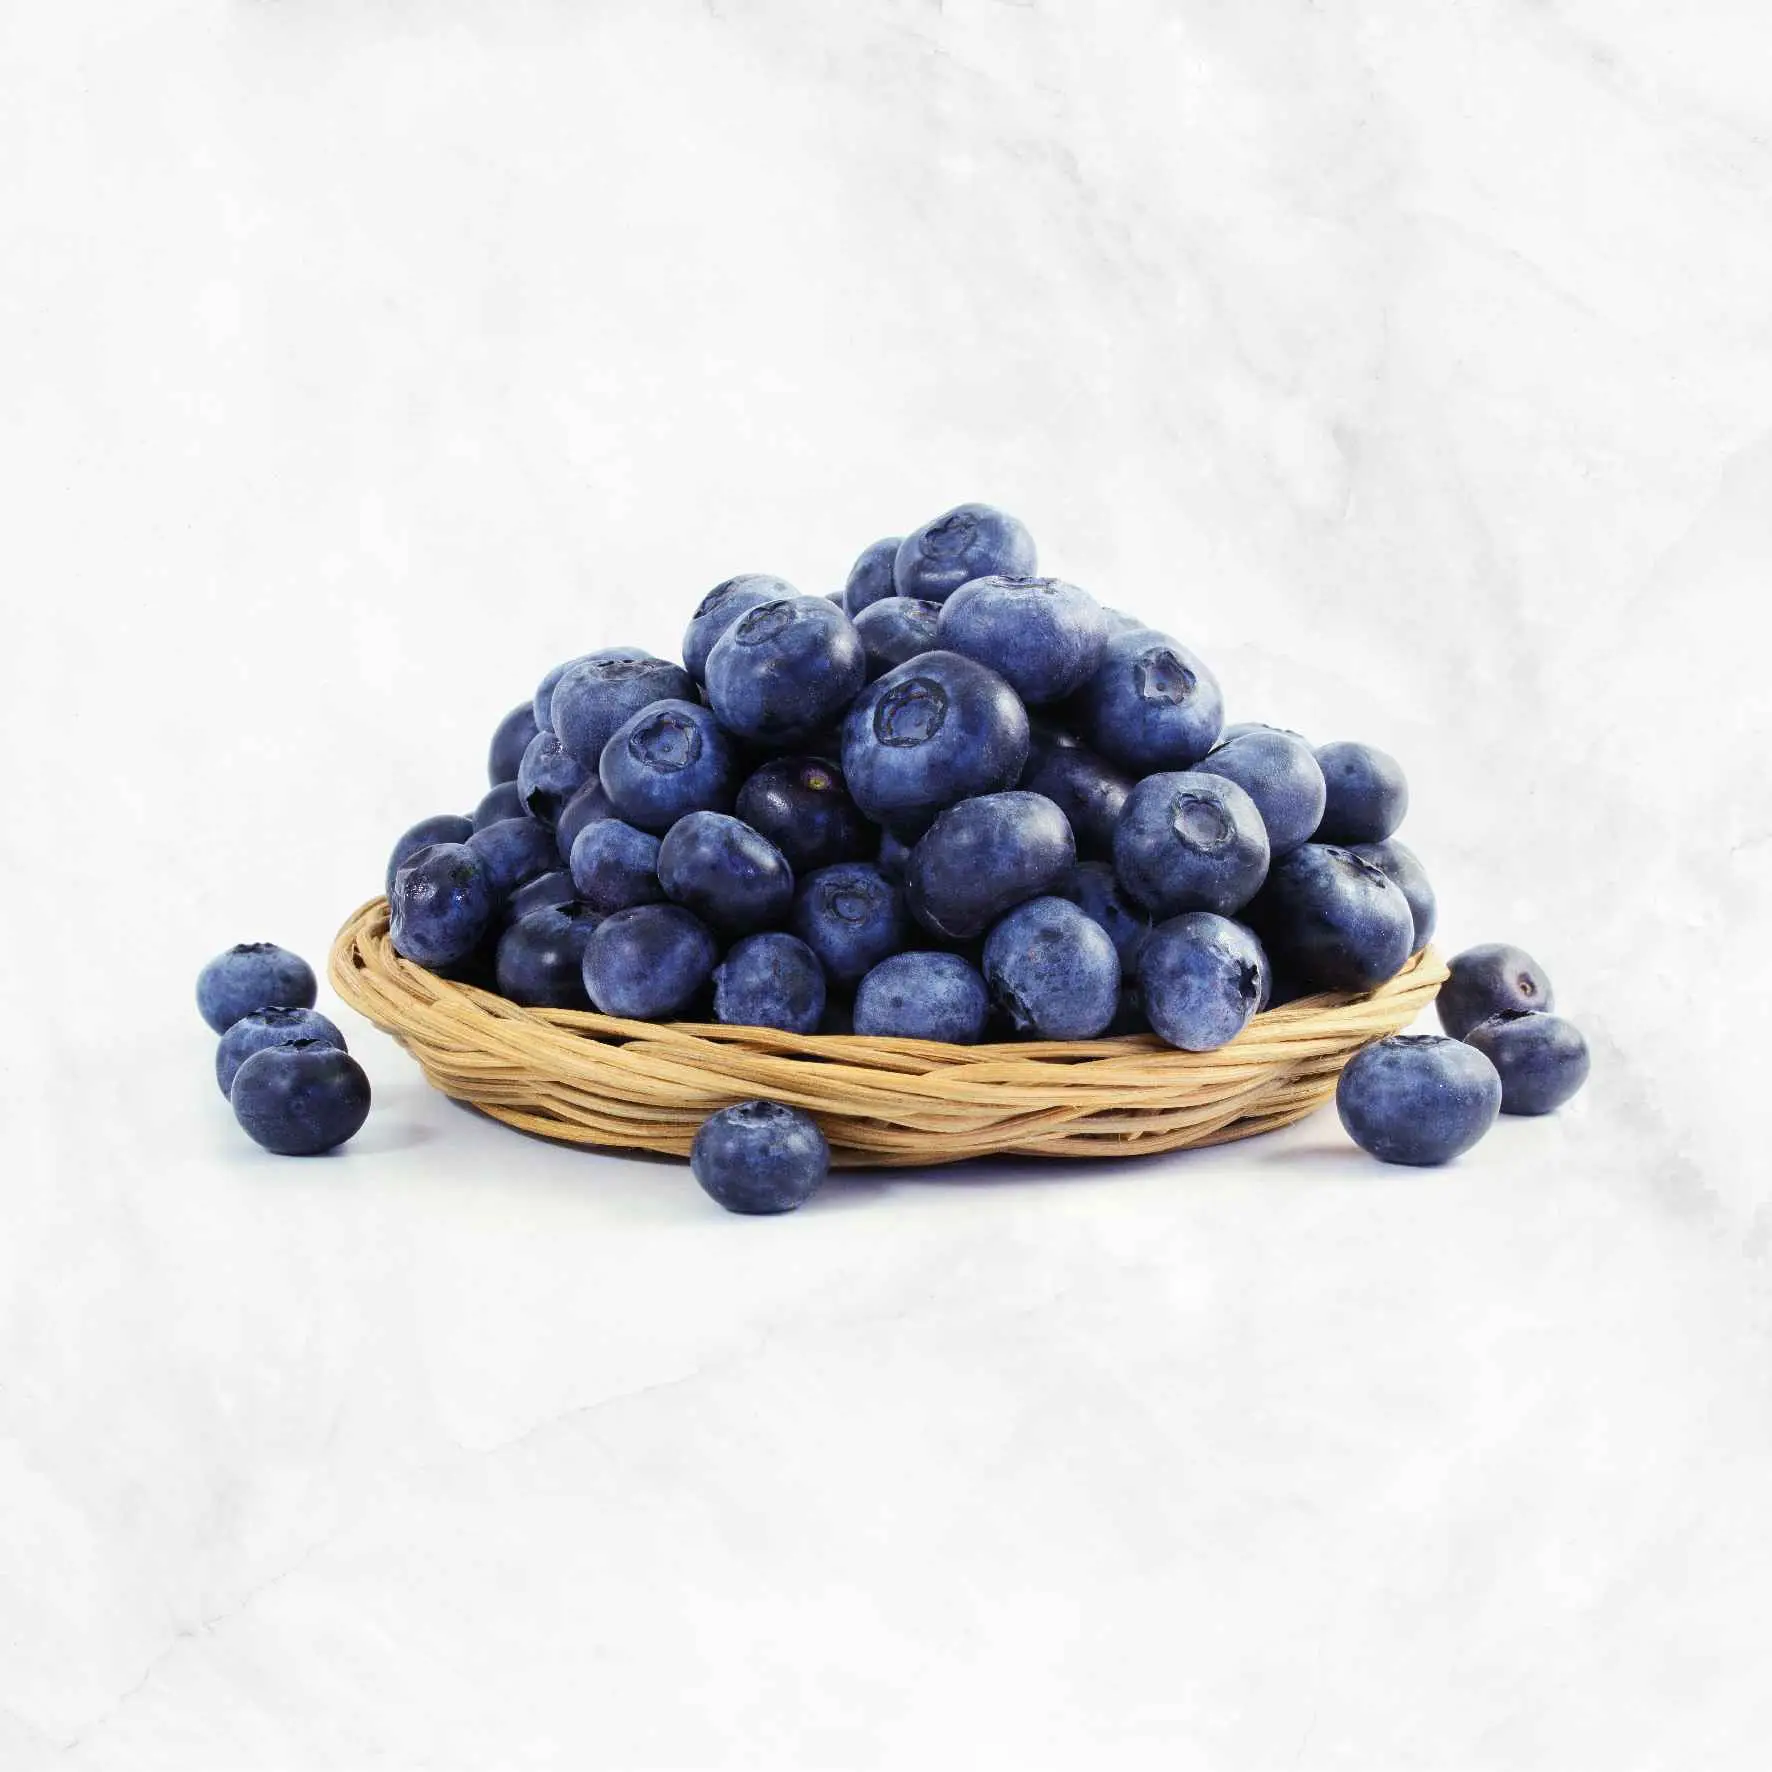 Organic Blueberries - Forbidden Fruit Orchards Delivery